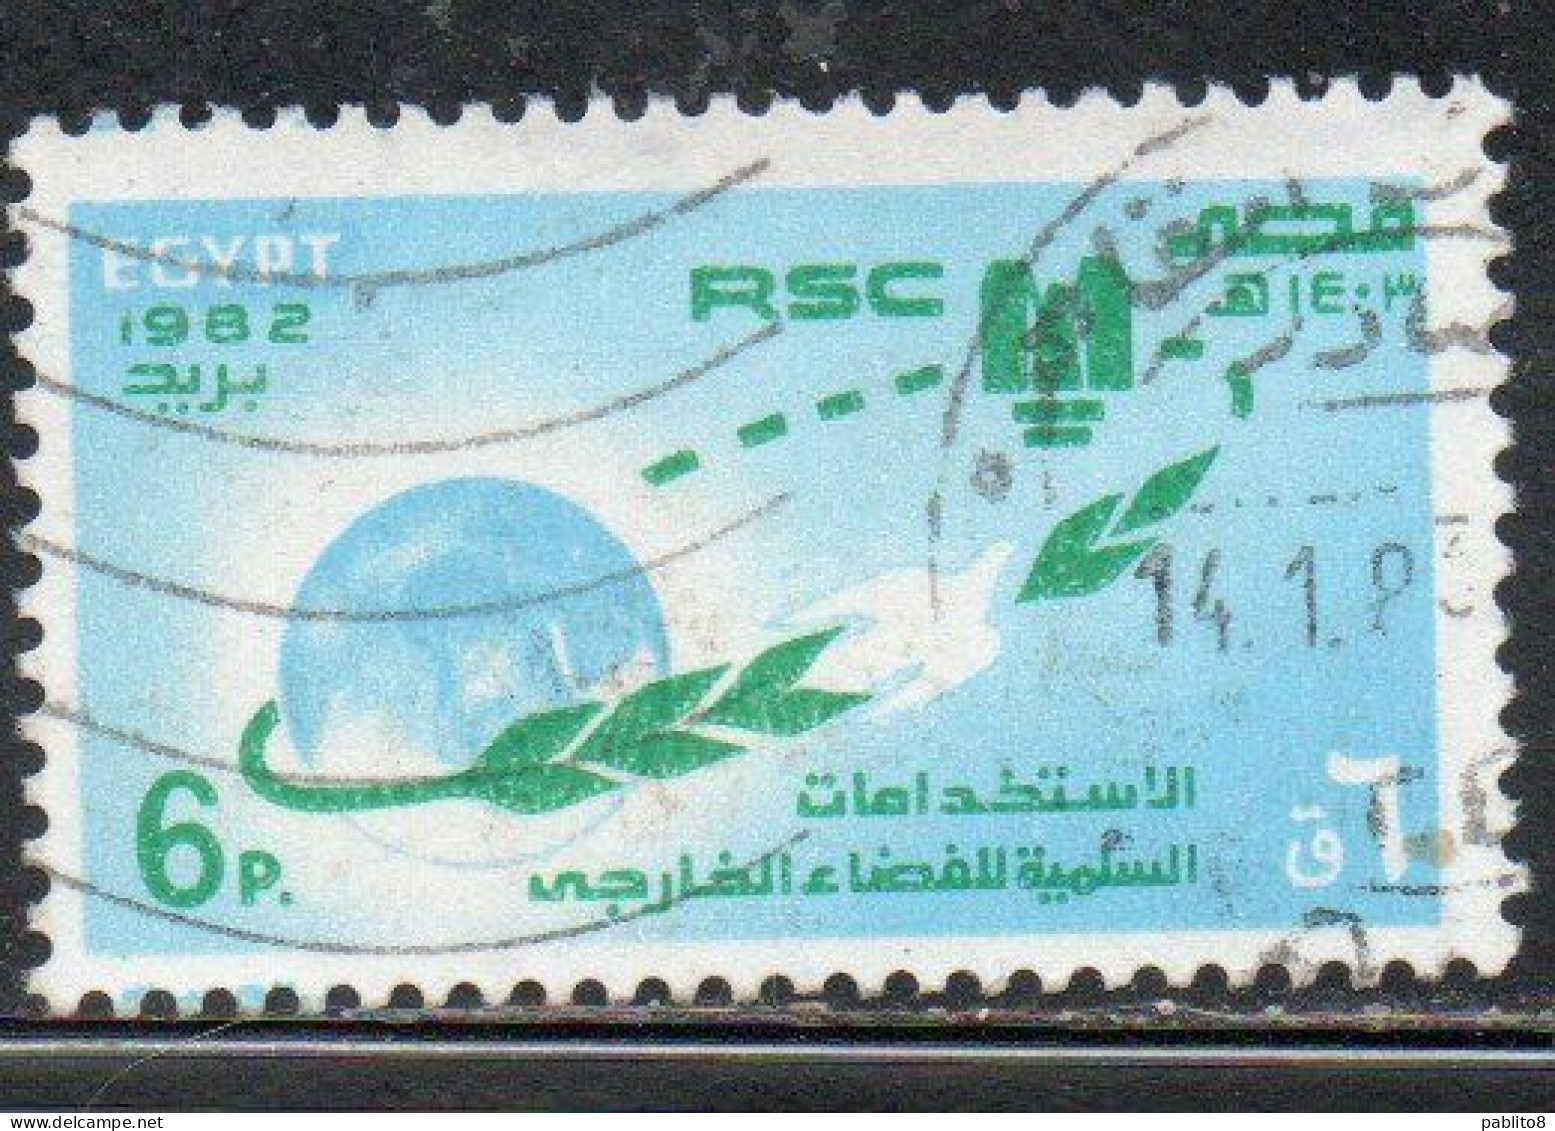 UAR EGYPT EGITTO 1982 UN ONU CONFERENCE ON PEACEFUL USES OF OUTER SPACE VIENNA 6p USED USATO OBLITERE' - Gebraucht